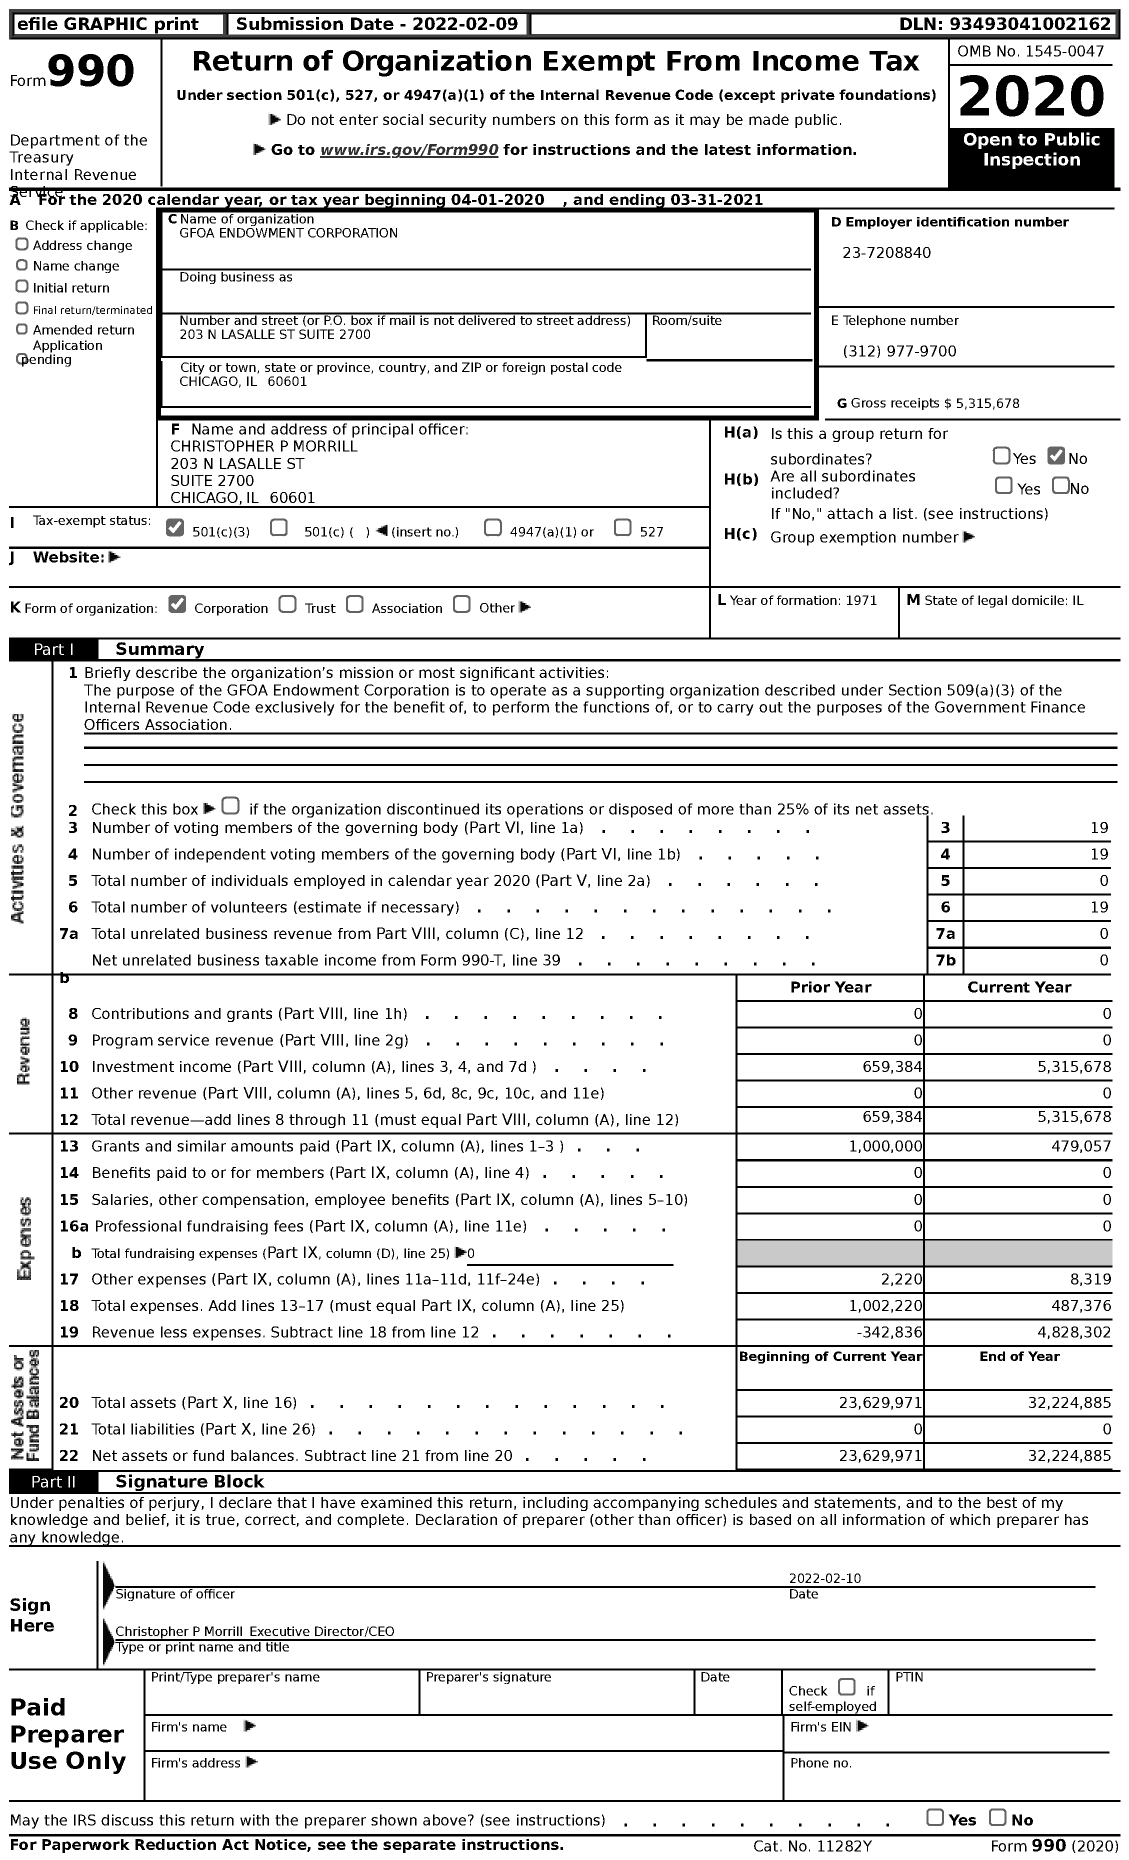 Image of first page of 2020 Form 990 for GFOA Endowment Corporation